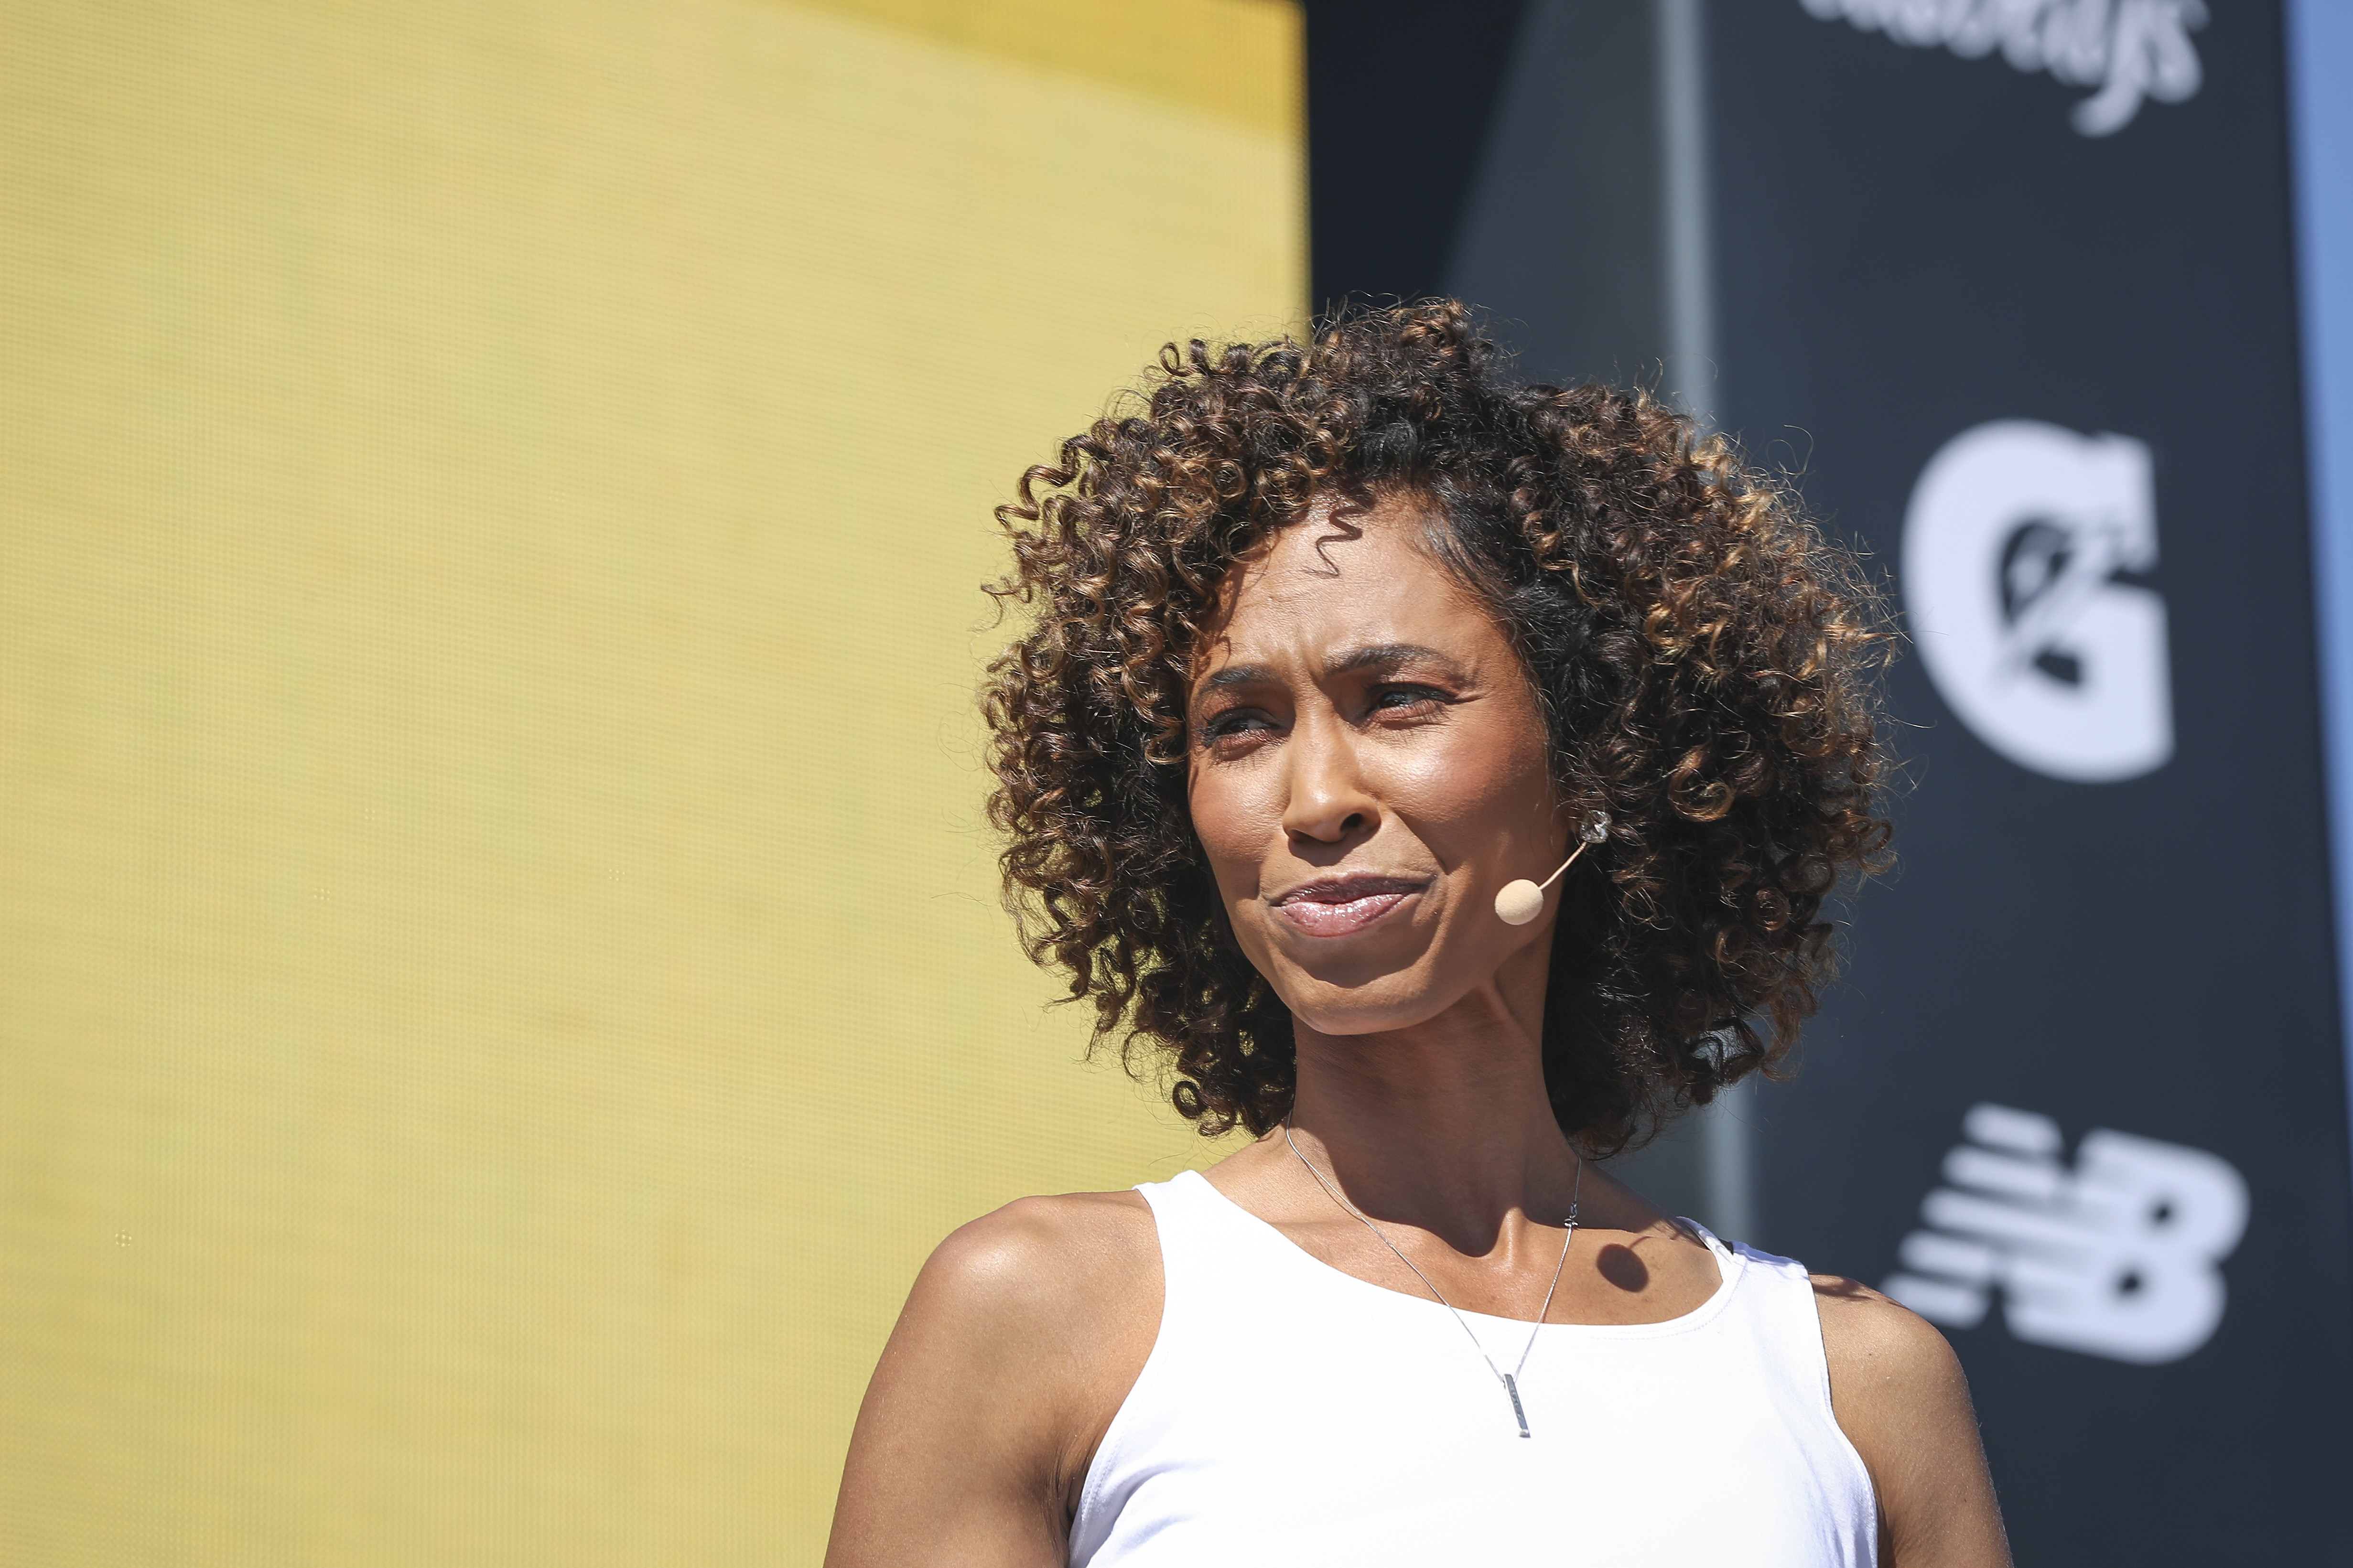 PGA Championship 2022 ESPNs Sage Steele, Aaron Wise each hit with errant tee shots at Southern Hills on consecutive days Golf News and Tour Information Golf Digest